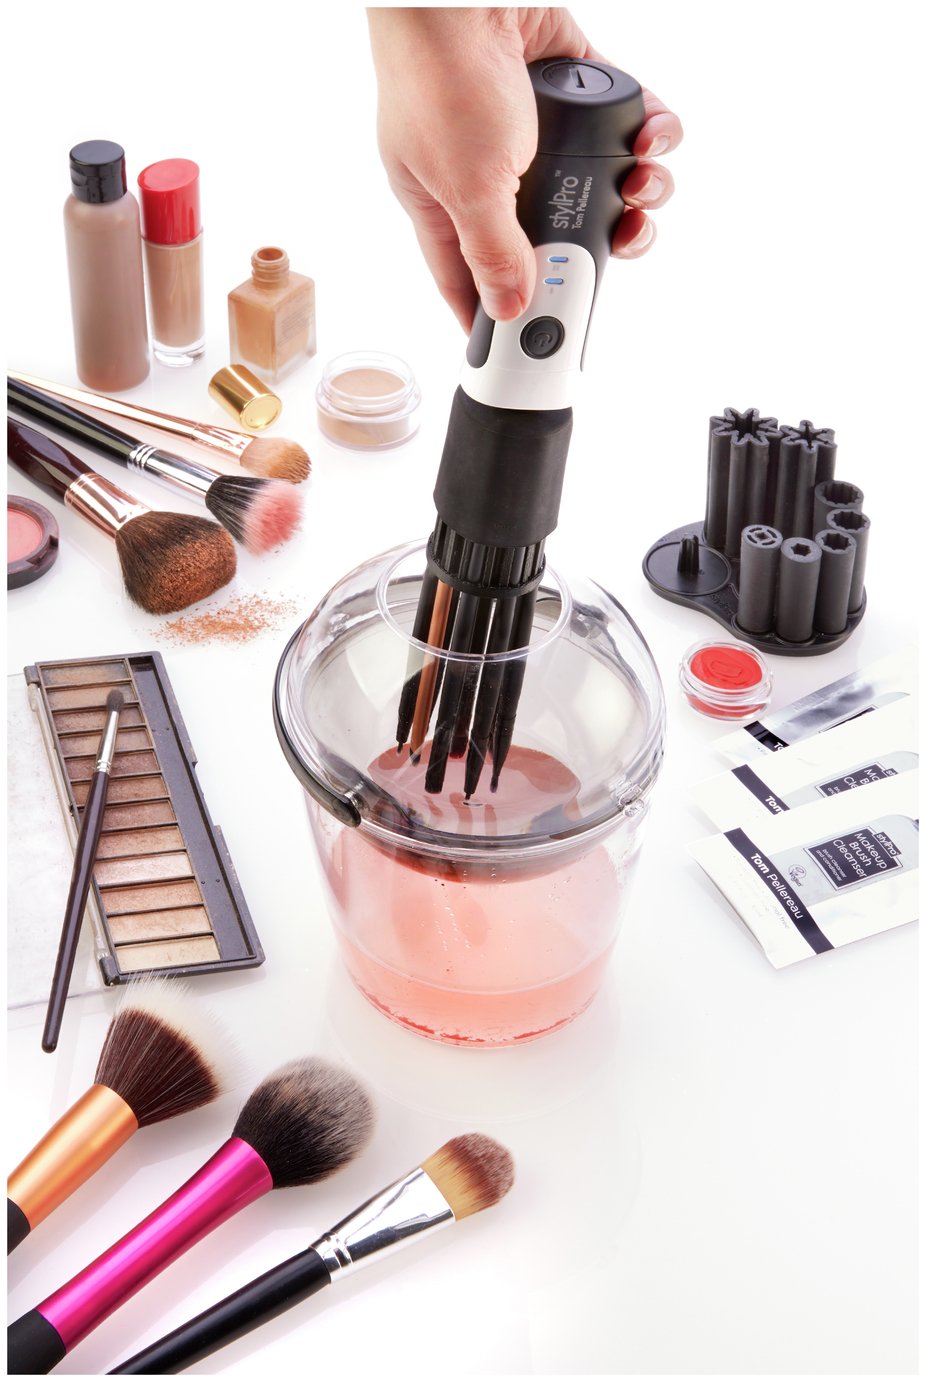 StylPro Expert Make-up Brush Cleaner and Dryer